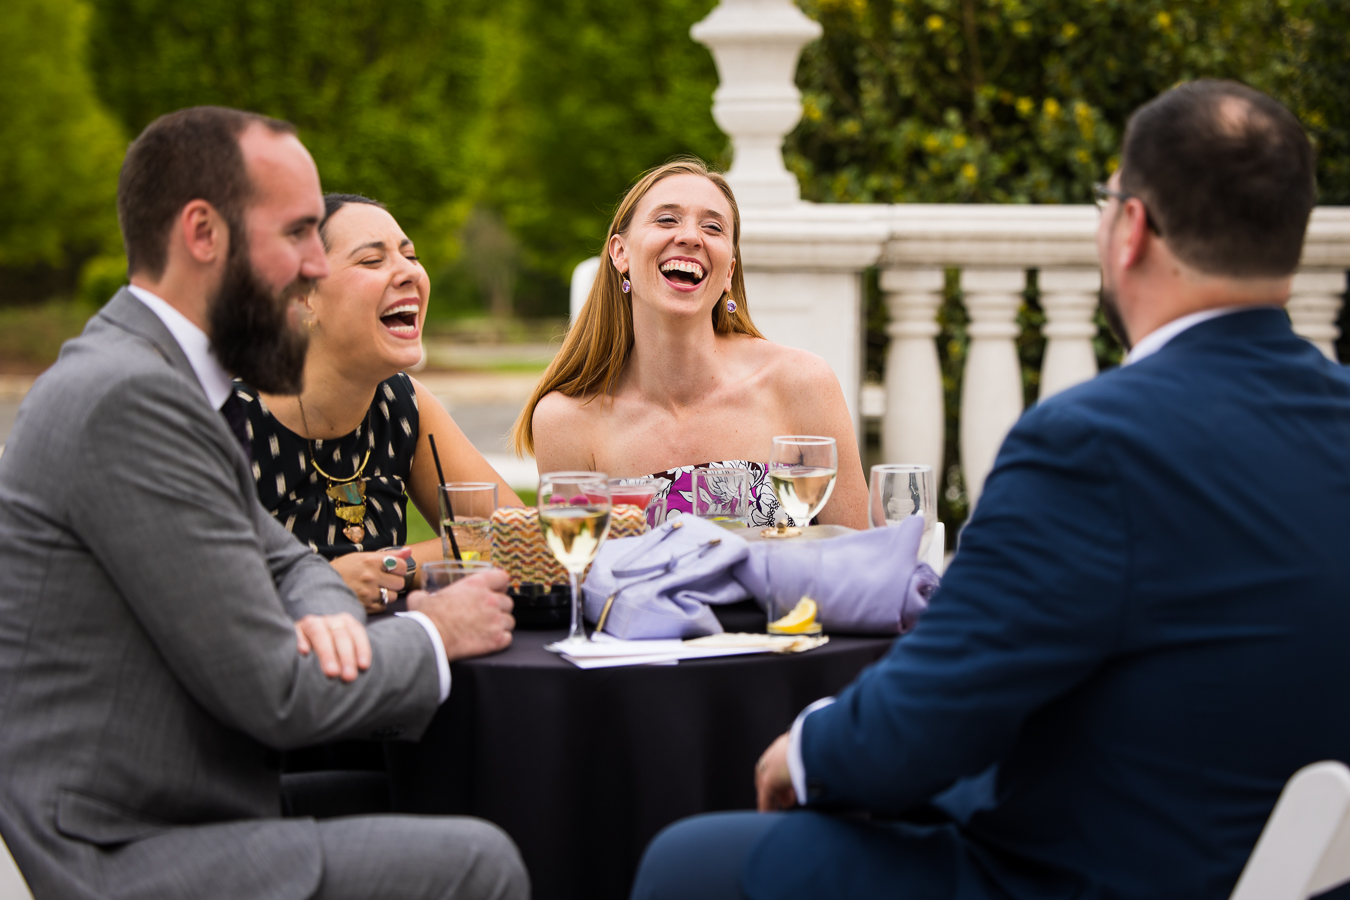 new jersey wedding photographer, lisa rhinehart, captures this authentic, candid moment of the guests as they mingle and laugh with one another during cocktail hour outside of the palace at somerset park 